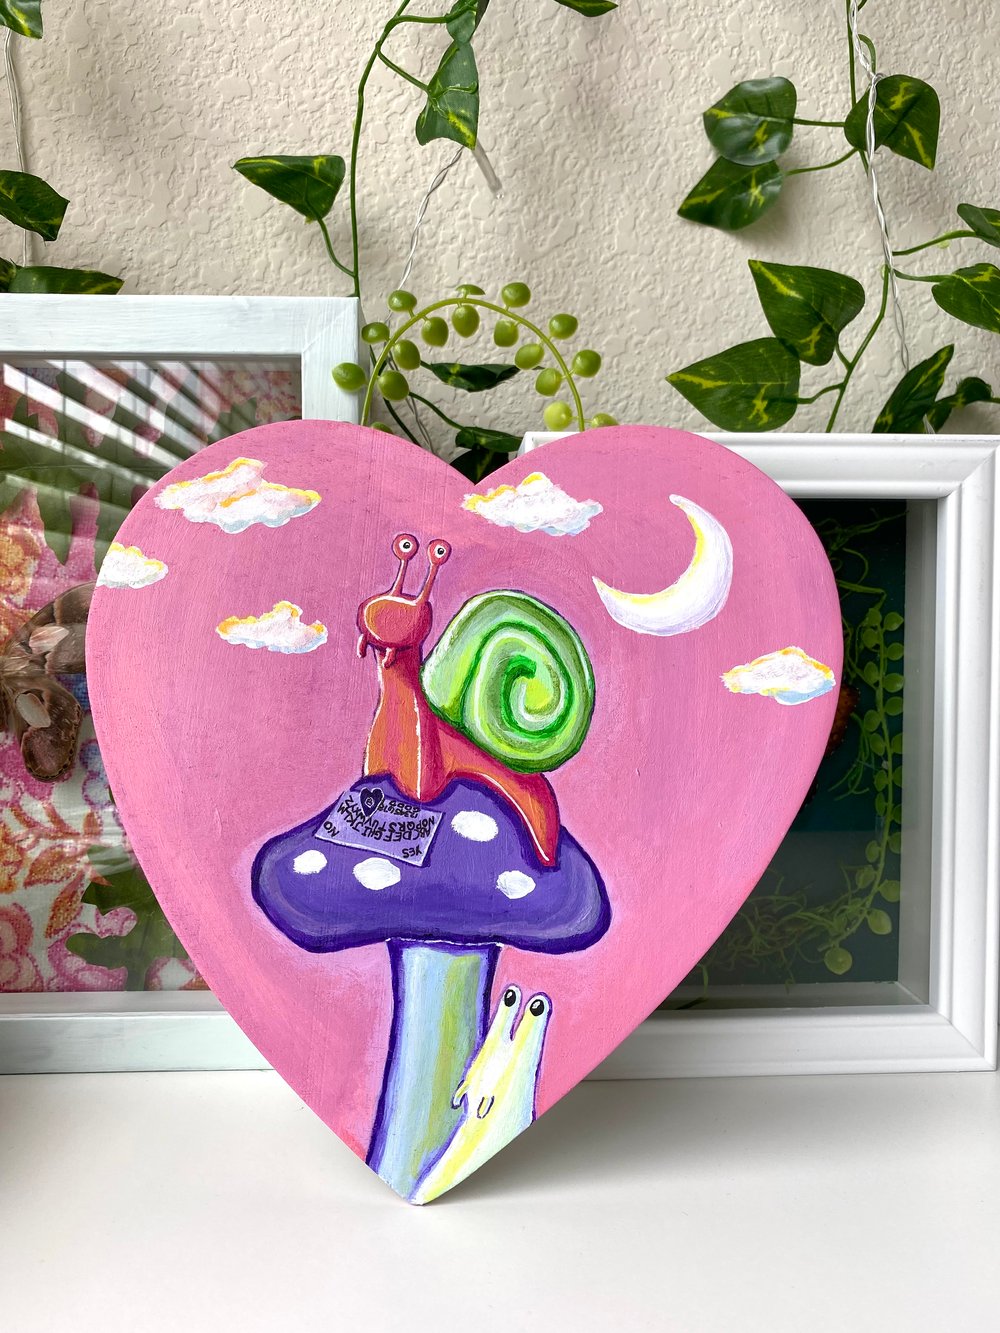 Image of "Spirit Board Snail" Heart Shaped Painting